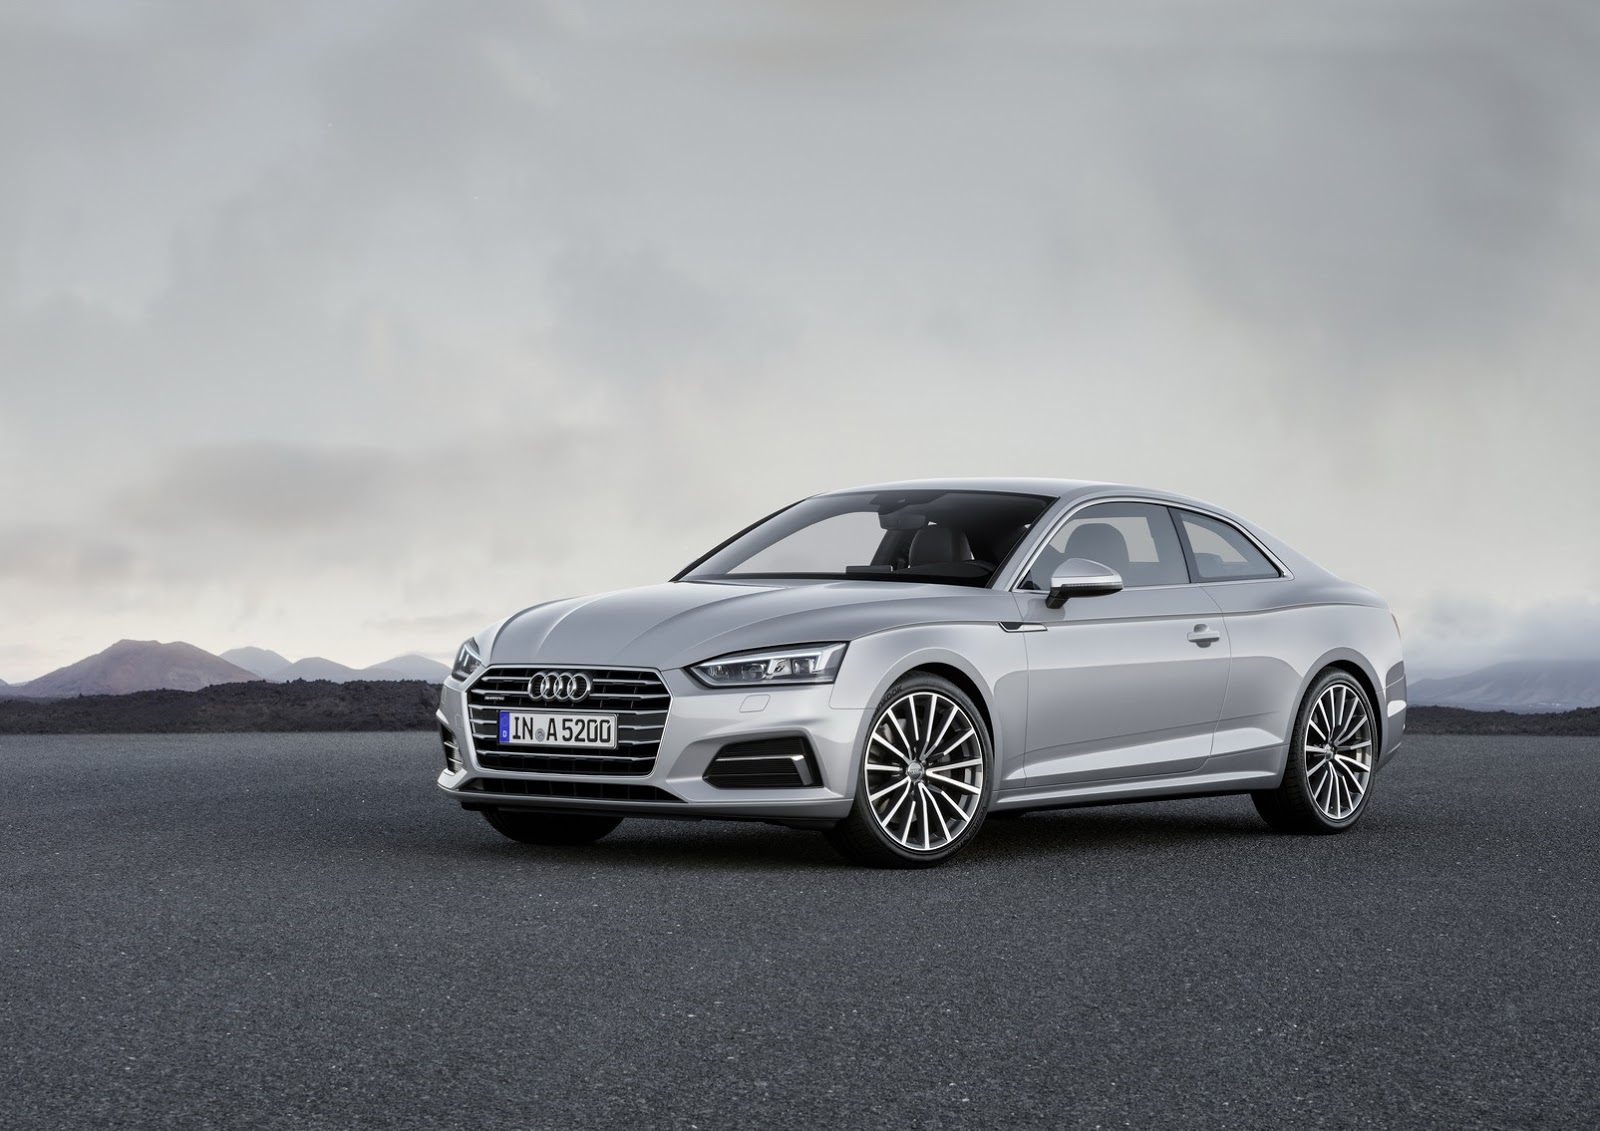 2017 Audi A5 Coupe Has Classic Proportions and 286 HP 3.0 TDI -  autoevolution